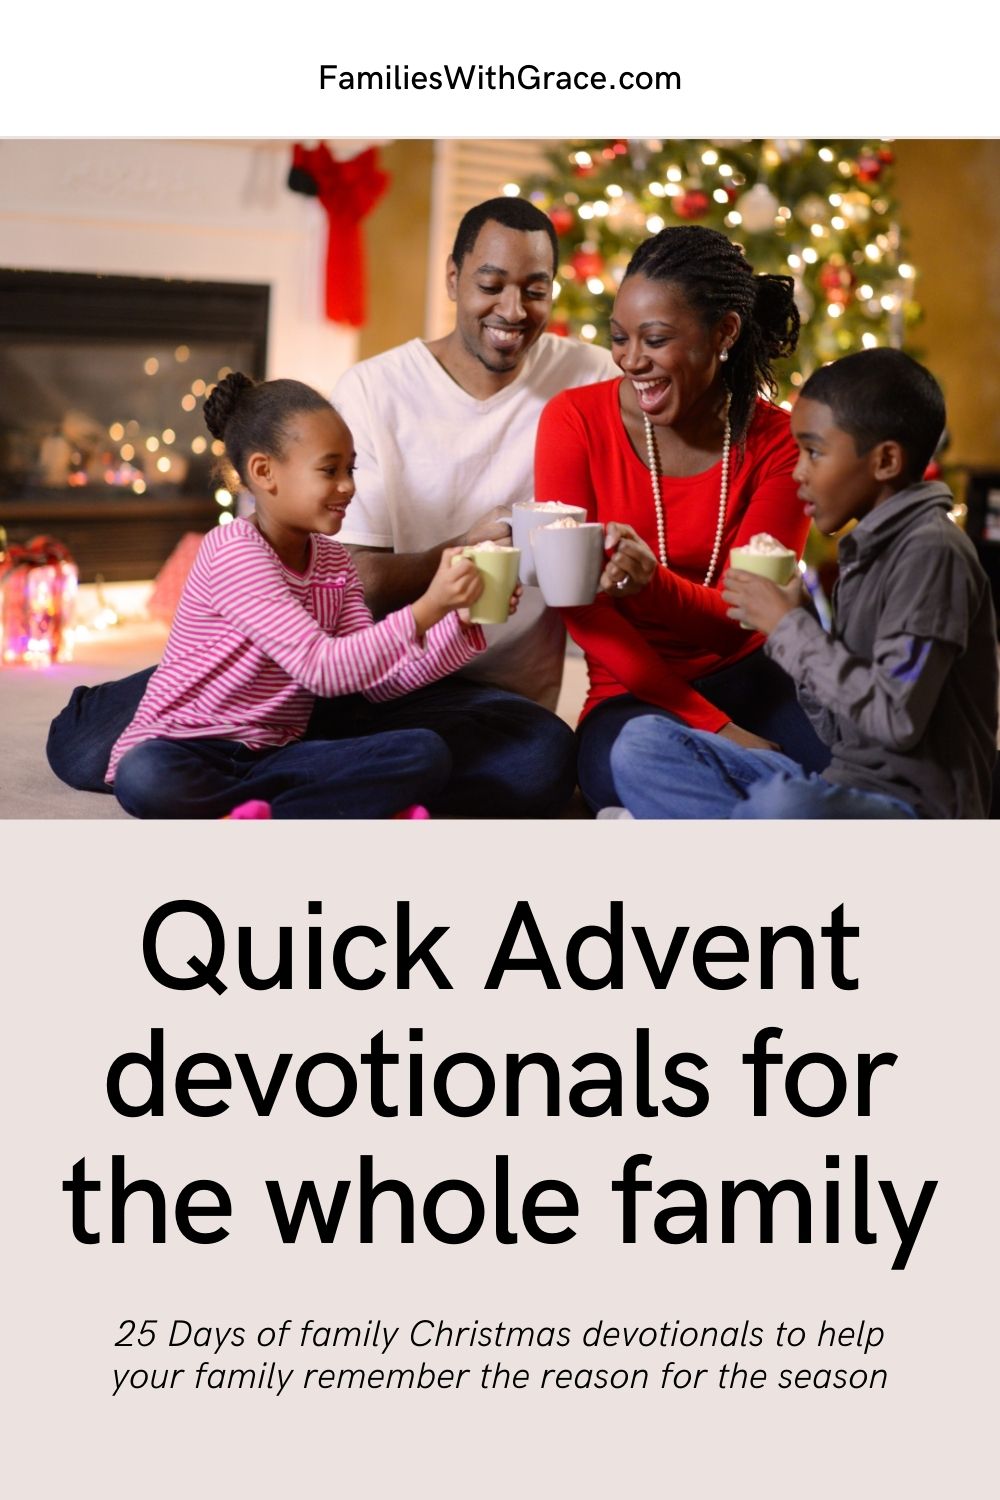 The best 5-minute Advent devotionals for families